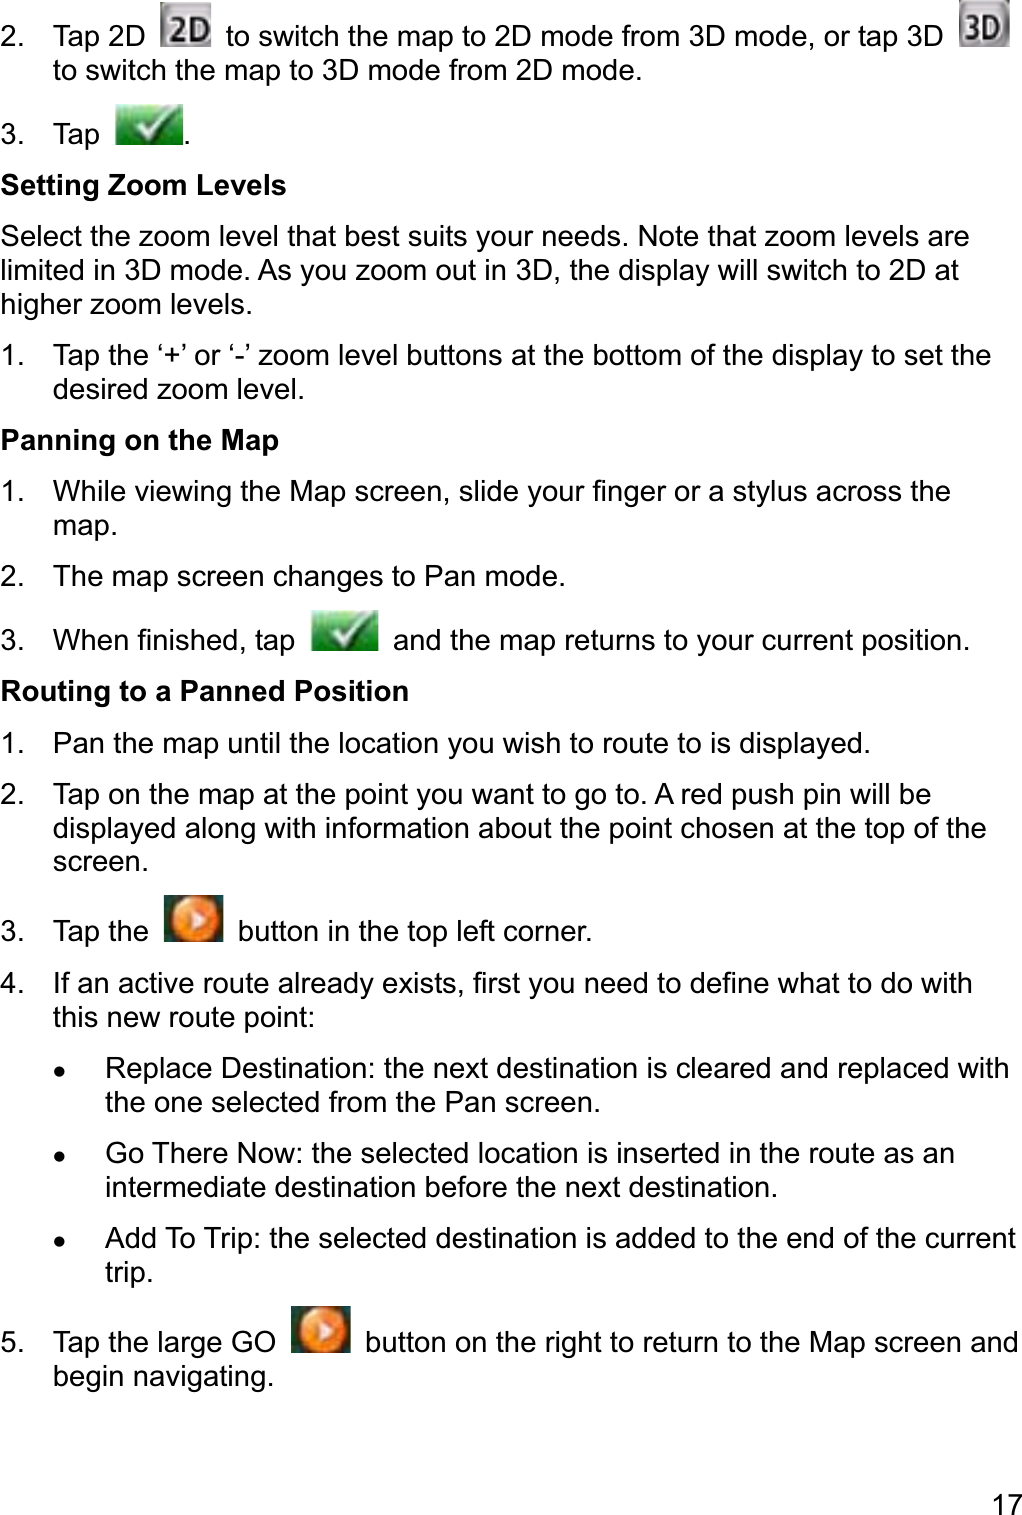 172. Tap 2D    to switch the map to 2D mode from 3D mode, or tap 3D to switch the map to 3D mode from 2D mode. 3. Tap  .Setting Zoom Levels Select the zoom level that best suits your needs. Note that zoom levels are limited in 3D mode. As you zoom out in 3D, the display will switch to 2D at higher zoom levels. 1.  Tap the ‘+’ or ‘-’ zoom level buttons at the bottom of the display to set the desired zoom level. Panning on the Map 1.  While viewing the Map screen, slide your finger or a stylus across the map.2.  The map screen changes to Pan mode. 3.  When finished, tap    and the map returns to your current position. Routing to a Panned Position 1.  Pan the map until the location you wish to route to is displayed. 2.  Tap on the map at the point you want to go to. A red push pin will be displayed along with information about the point chosen at the top of the screen. 3. Tap the    button in the top left corner. 4.  If an active route already exists, first you need to define what to do with this new route point: zReplace Destination: the next destination is cleared and replaced with the one selected from the Pan screen. zGo There Now: the selected location is inserted in the route as an intermediate destination before the next destination. zAdd To Trip: the selected destination is added to the end of the current trip.5.  Tap the large GO    button on the right to return to the Map screen and begin navigating. 